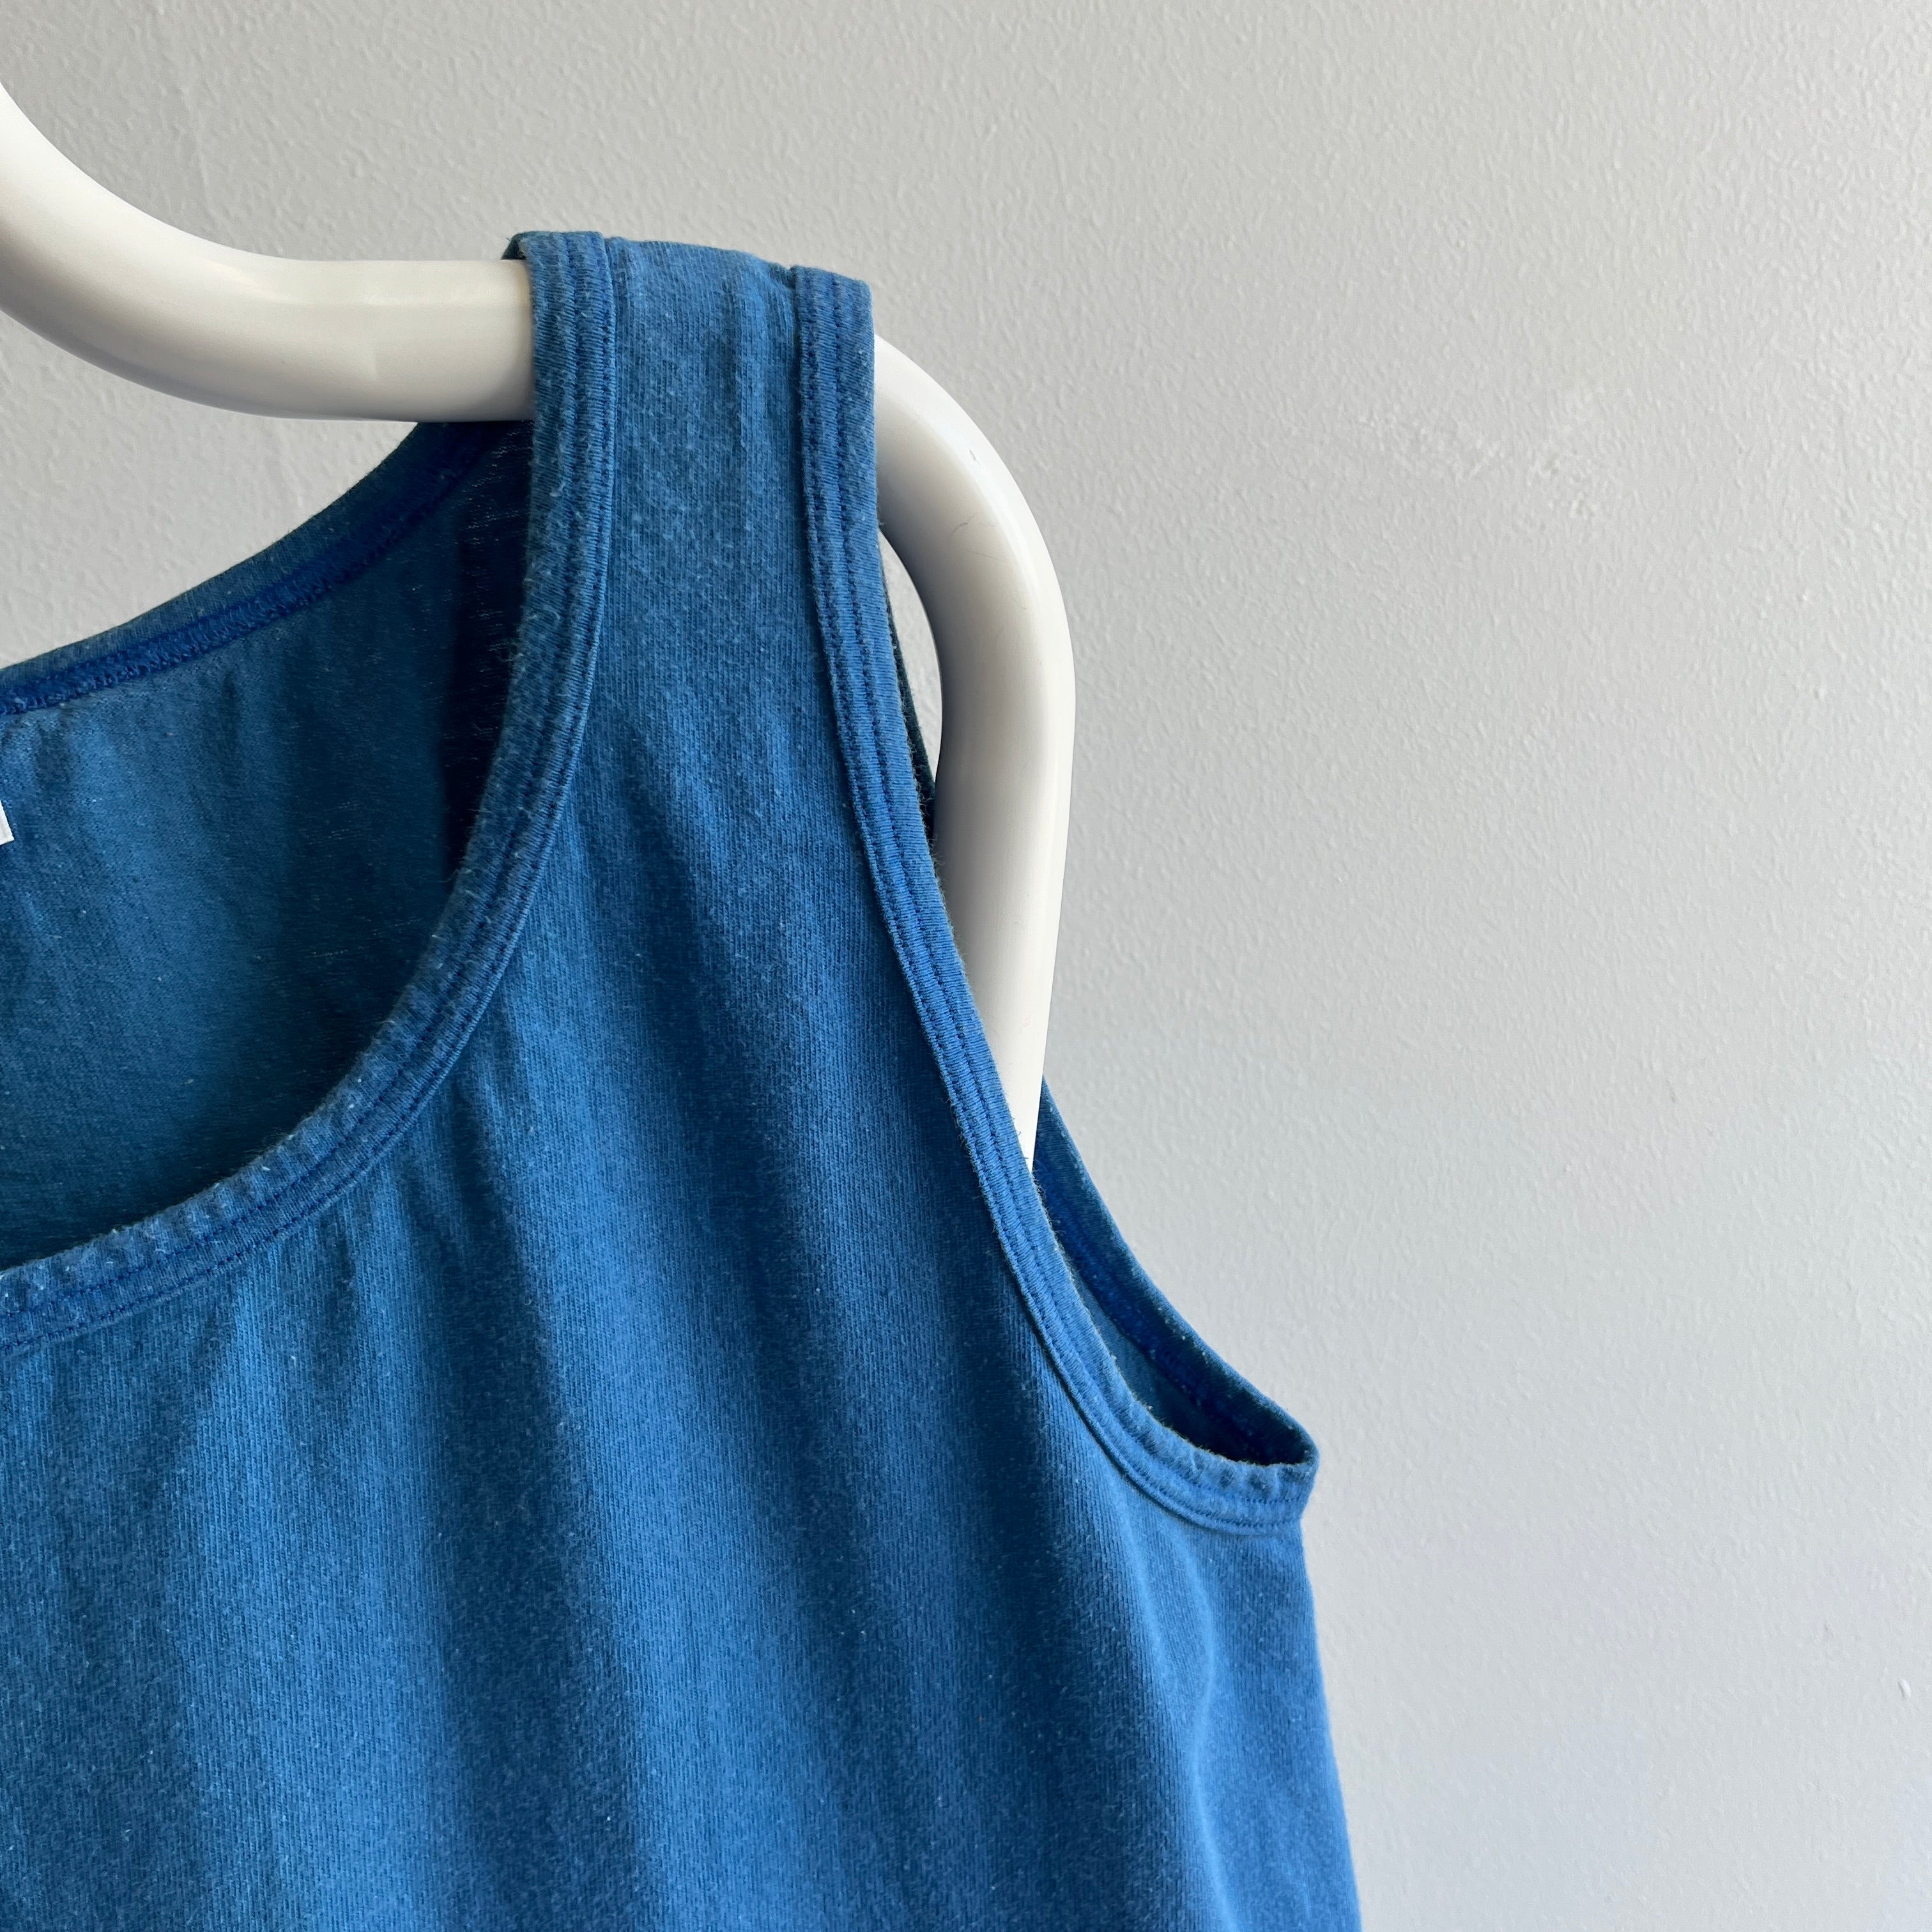 1980/90s Cotton Blue Tank Top by Starter